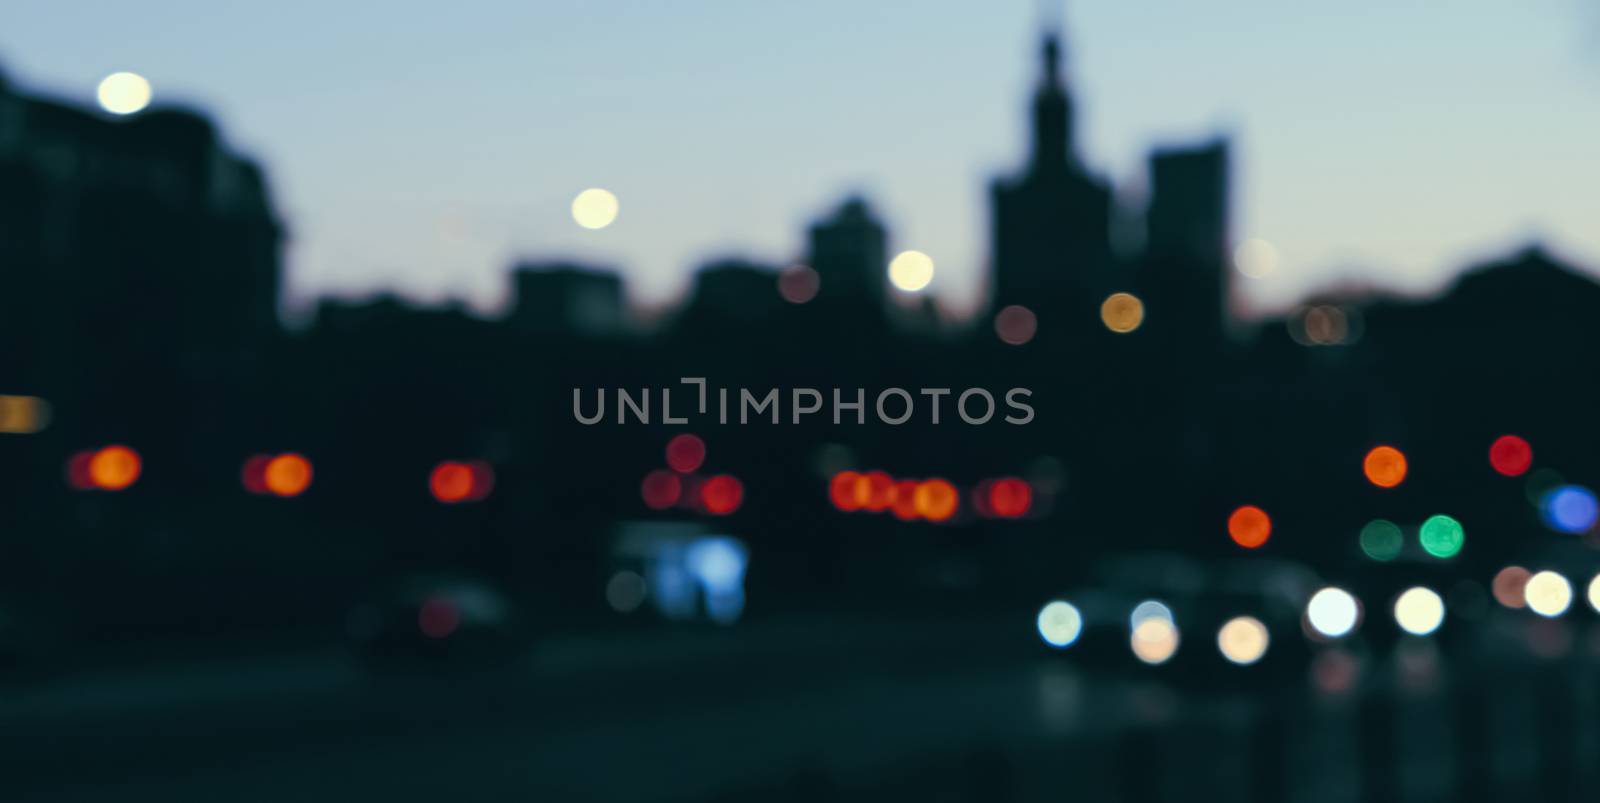 Blurry cityscape silhouette of a European city as background, evening view of Warsaw, Poland